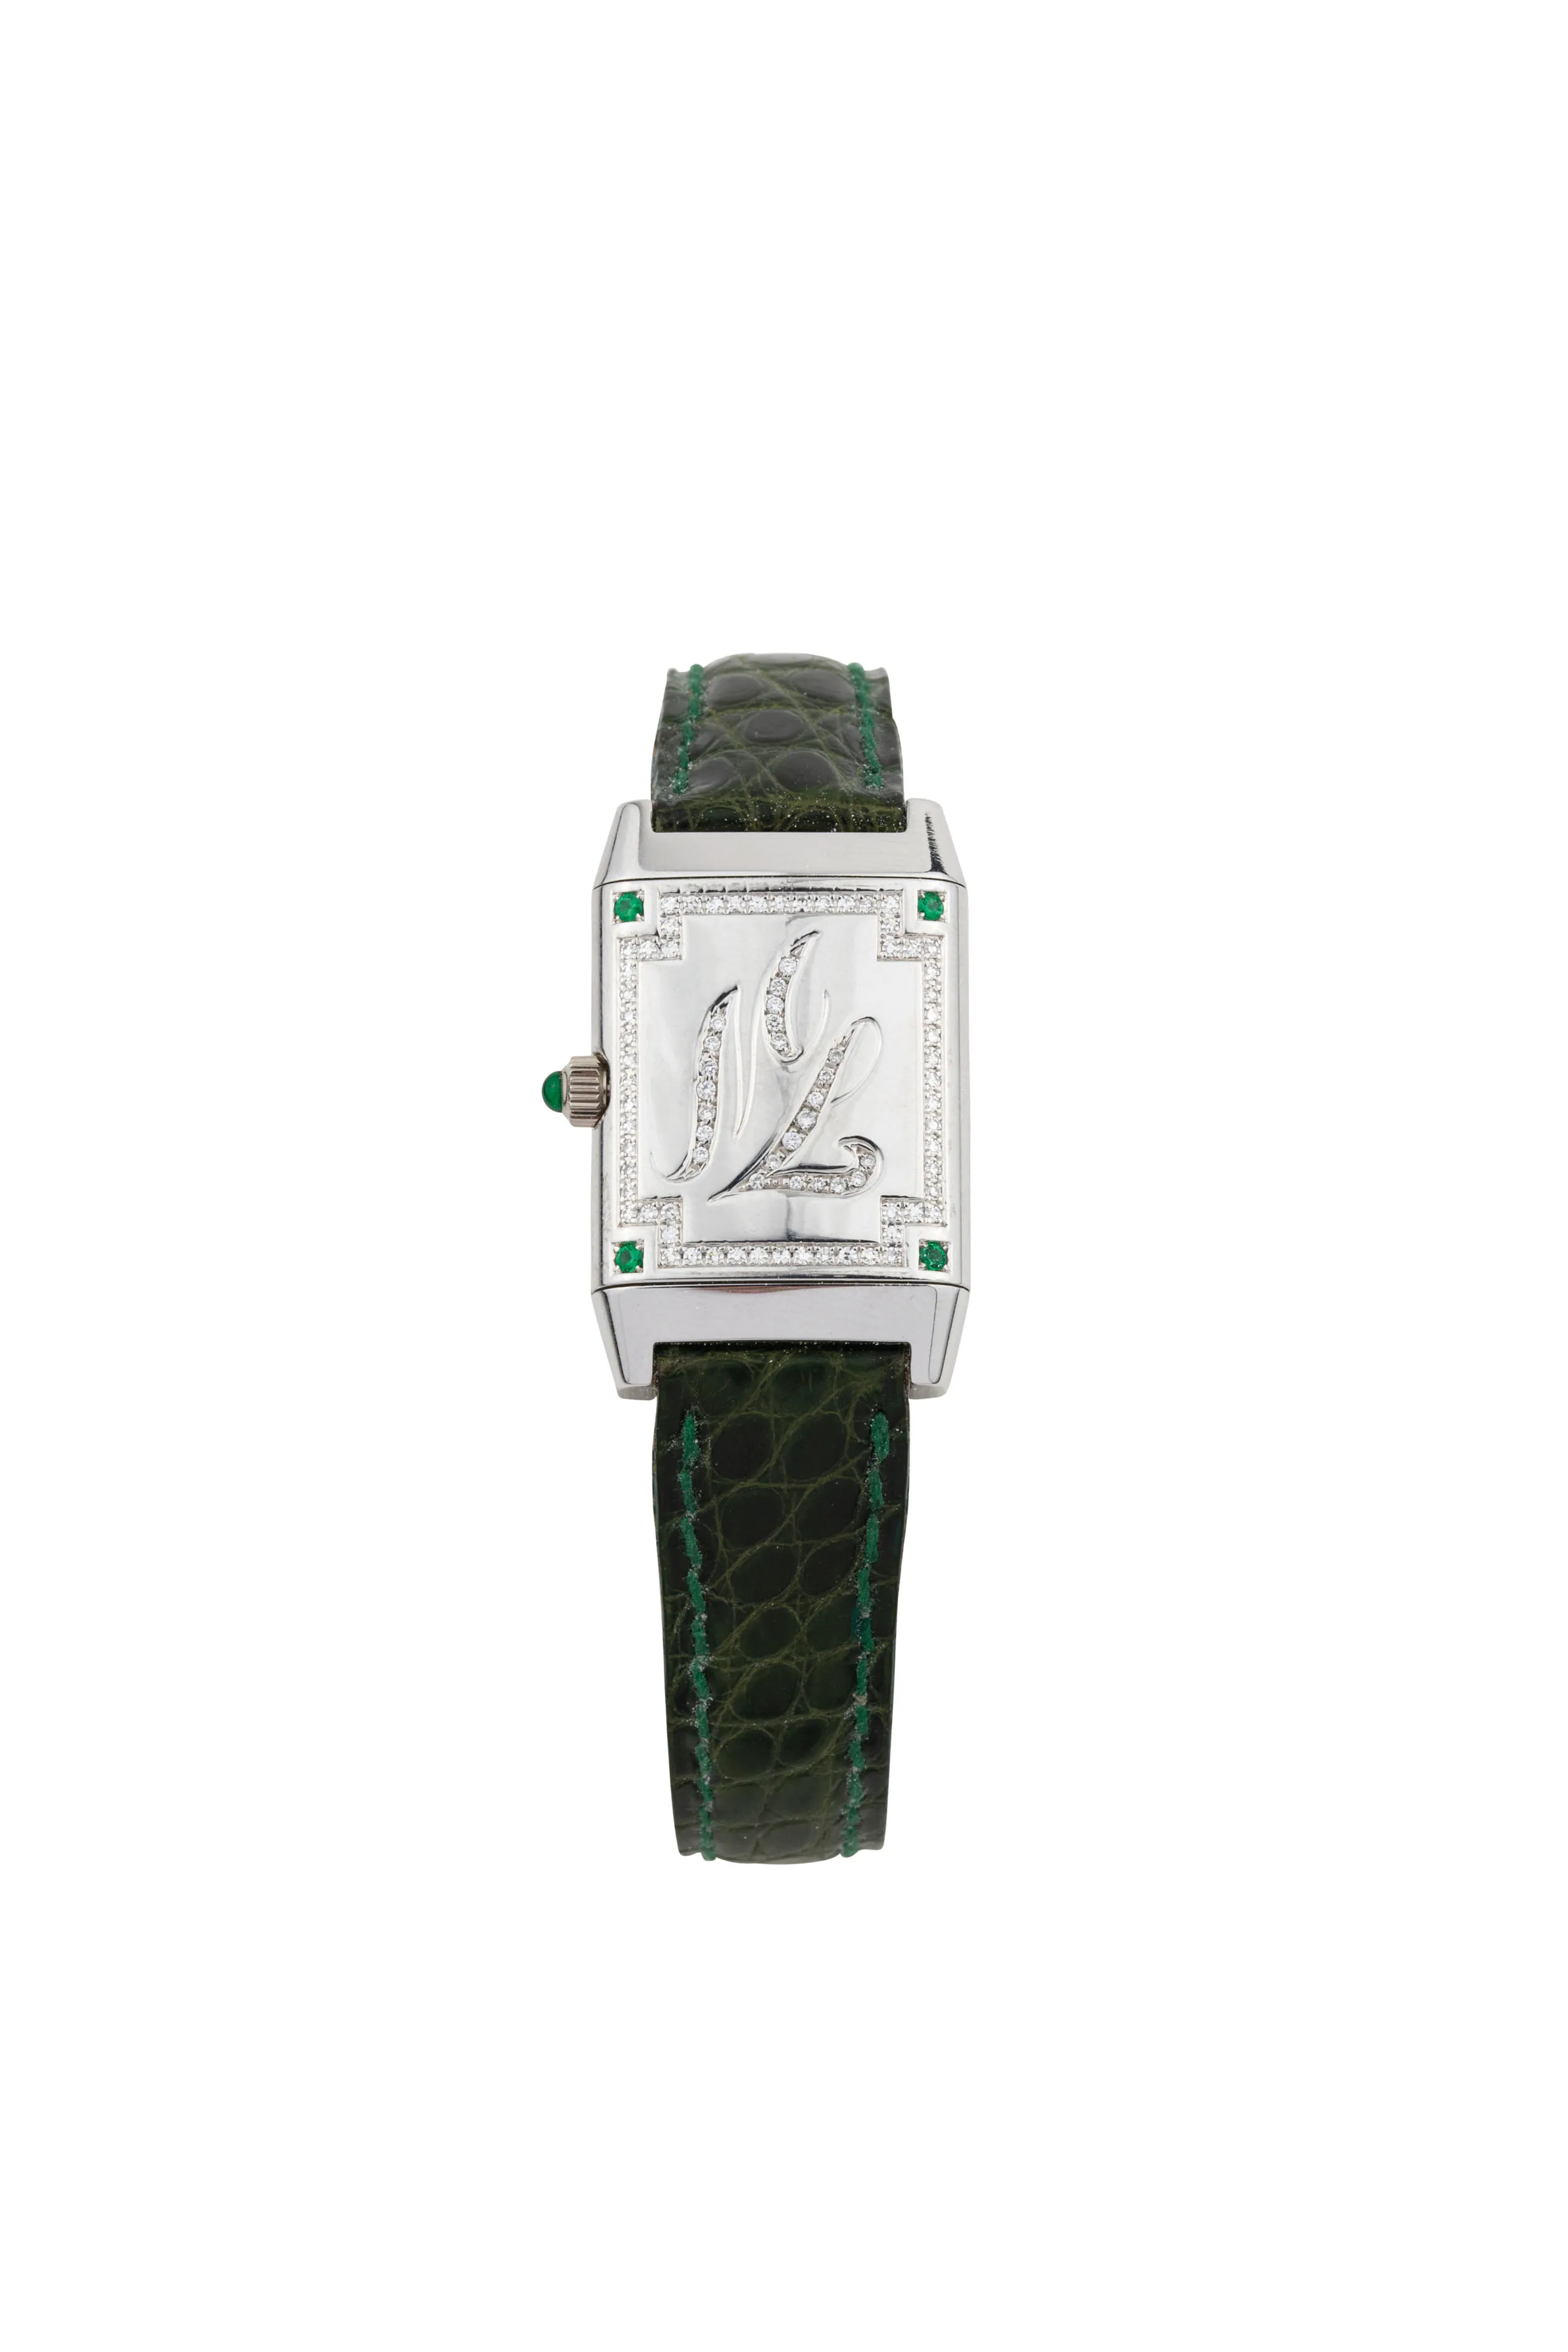 Jaeger-LeCoultre Reverso 265.3.86 20mm White gold, diamonds and sapphires 1